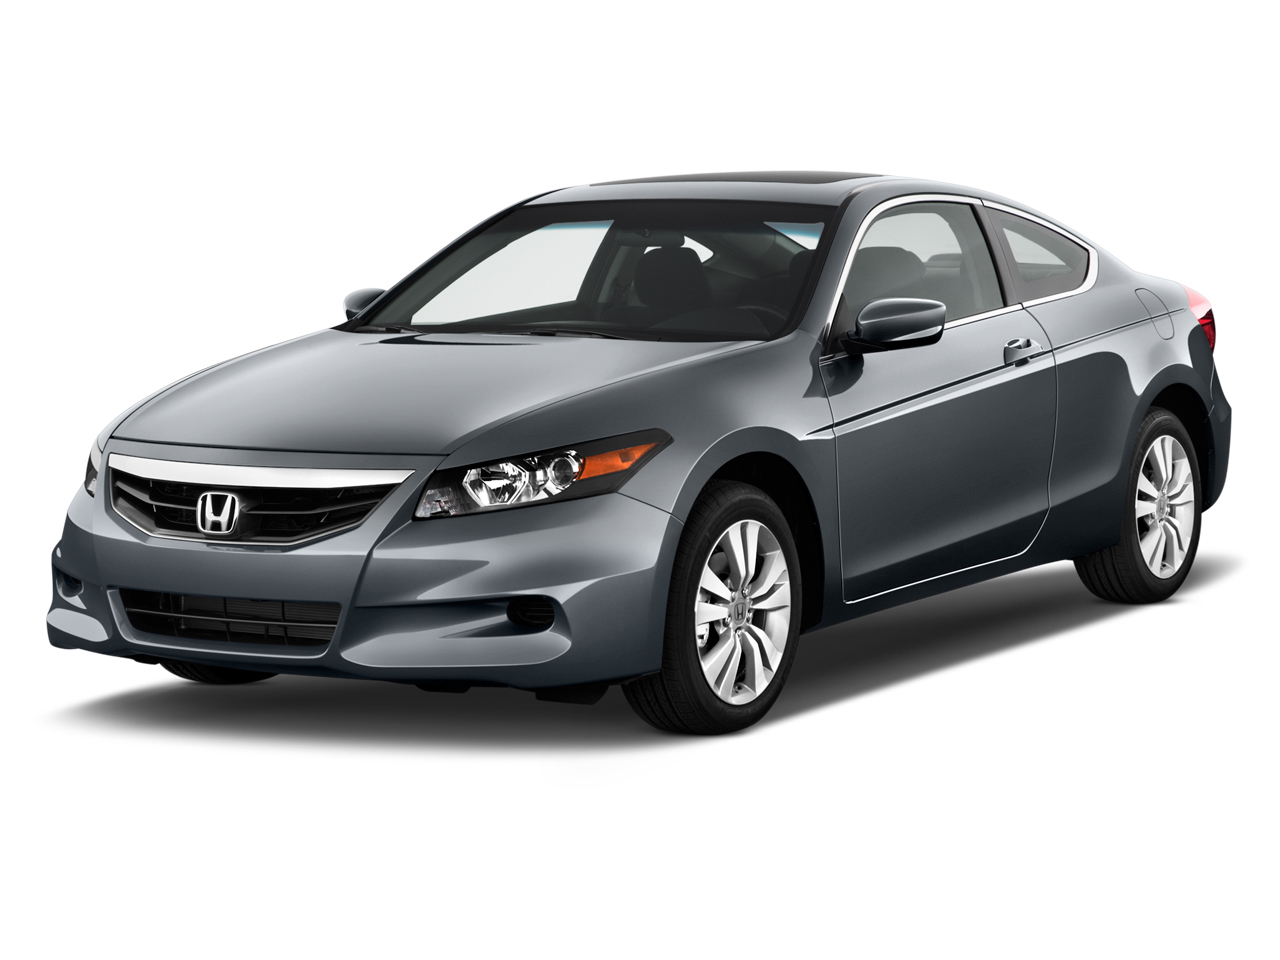 2012 Honda Accord Coupe Review, Ratings, Specs, Prices, and Photos